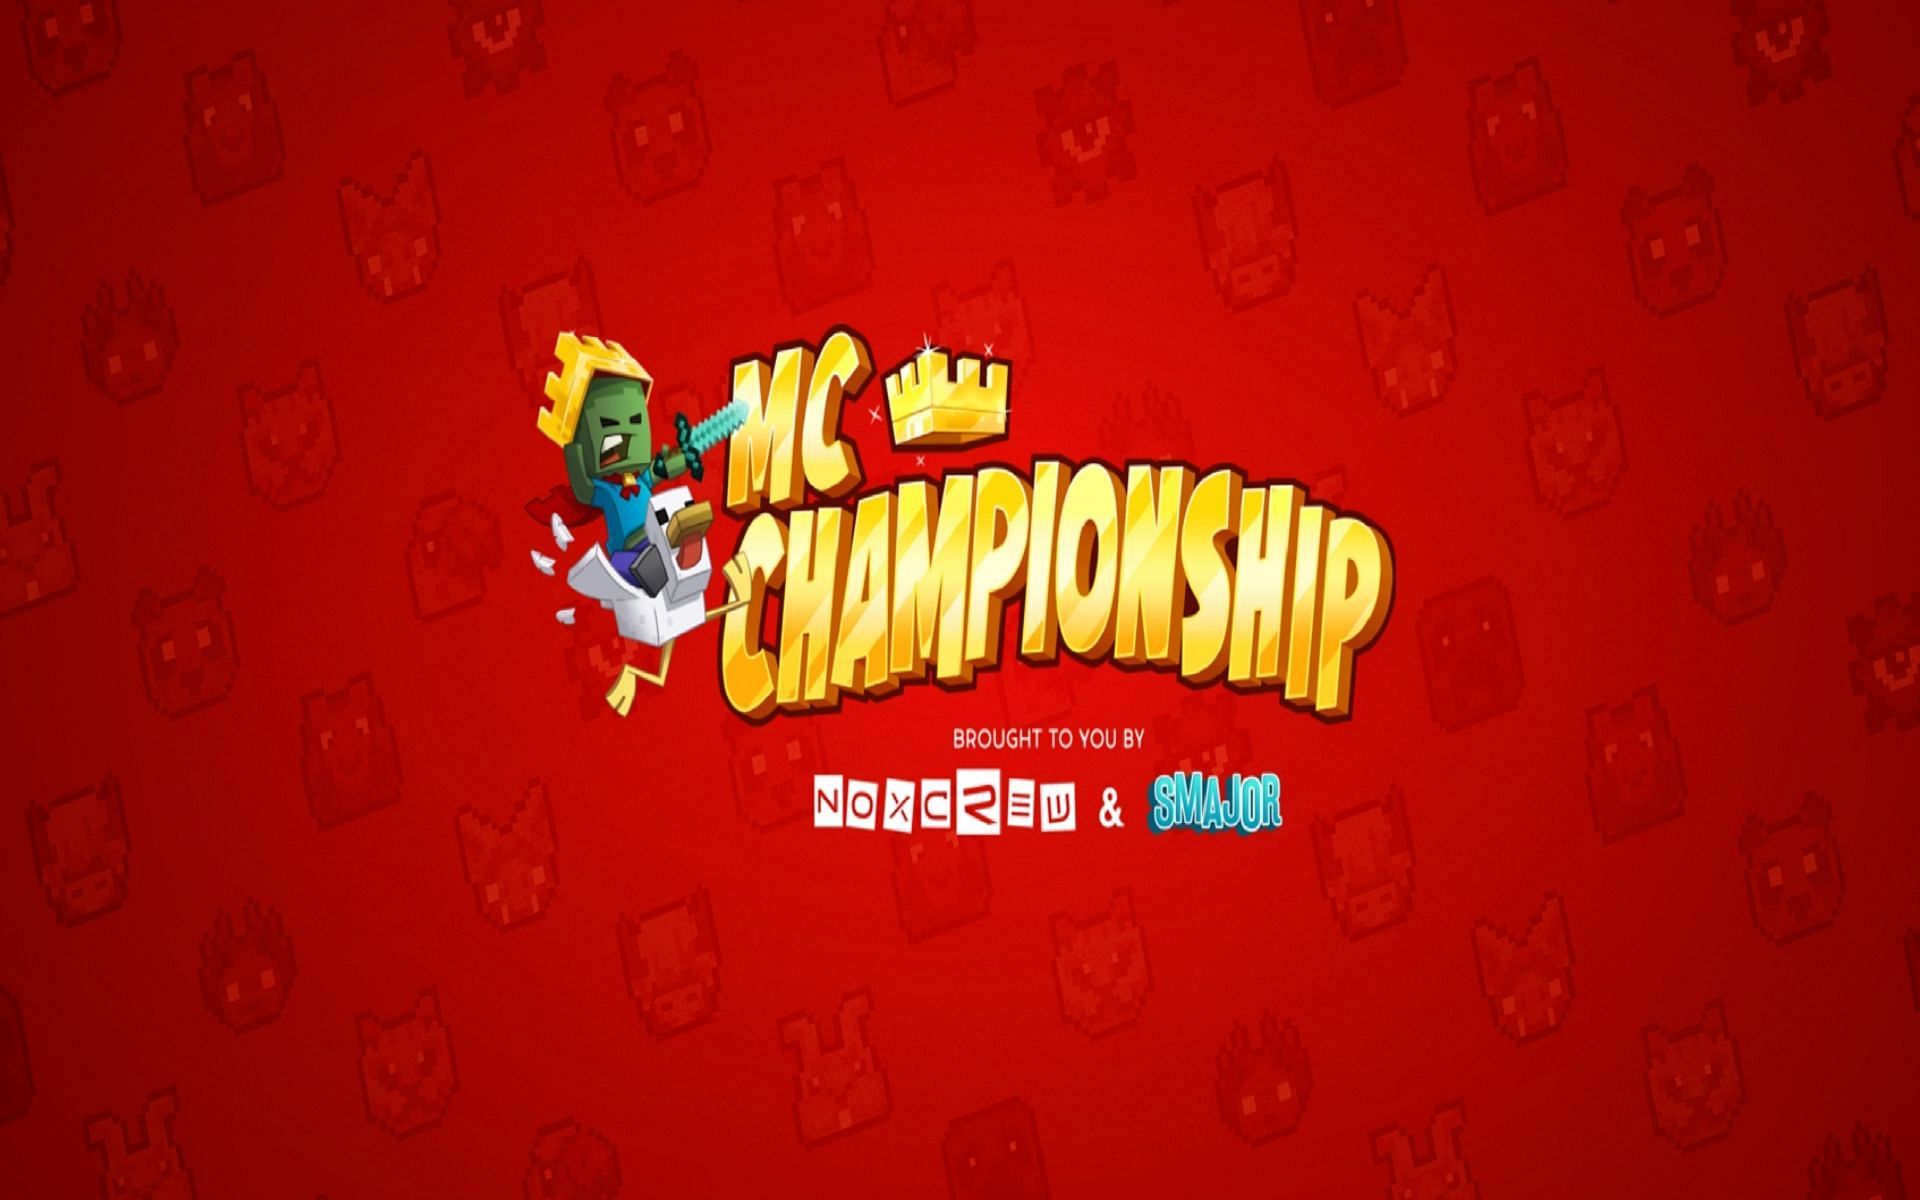 The official poster for the Minecraft Championship (Image via the Noxcrew)